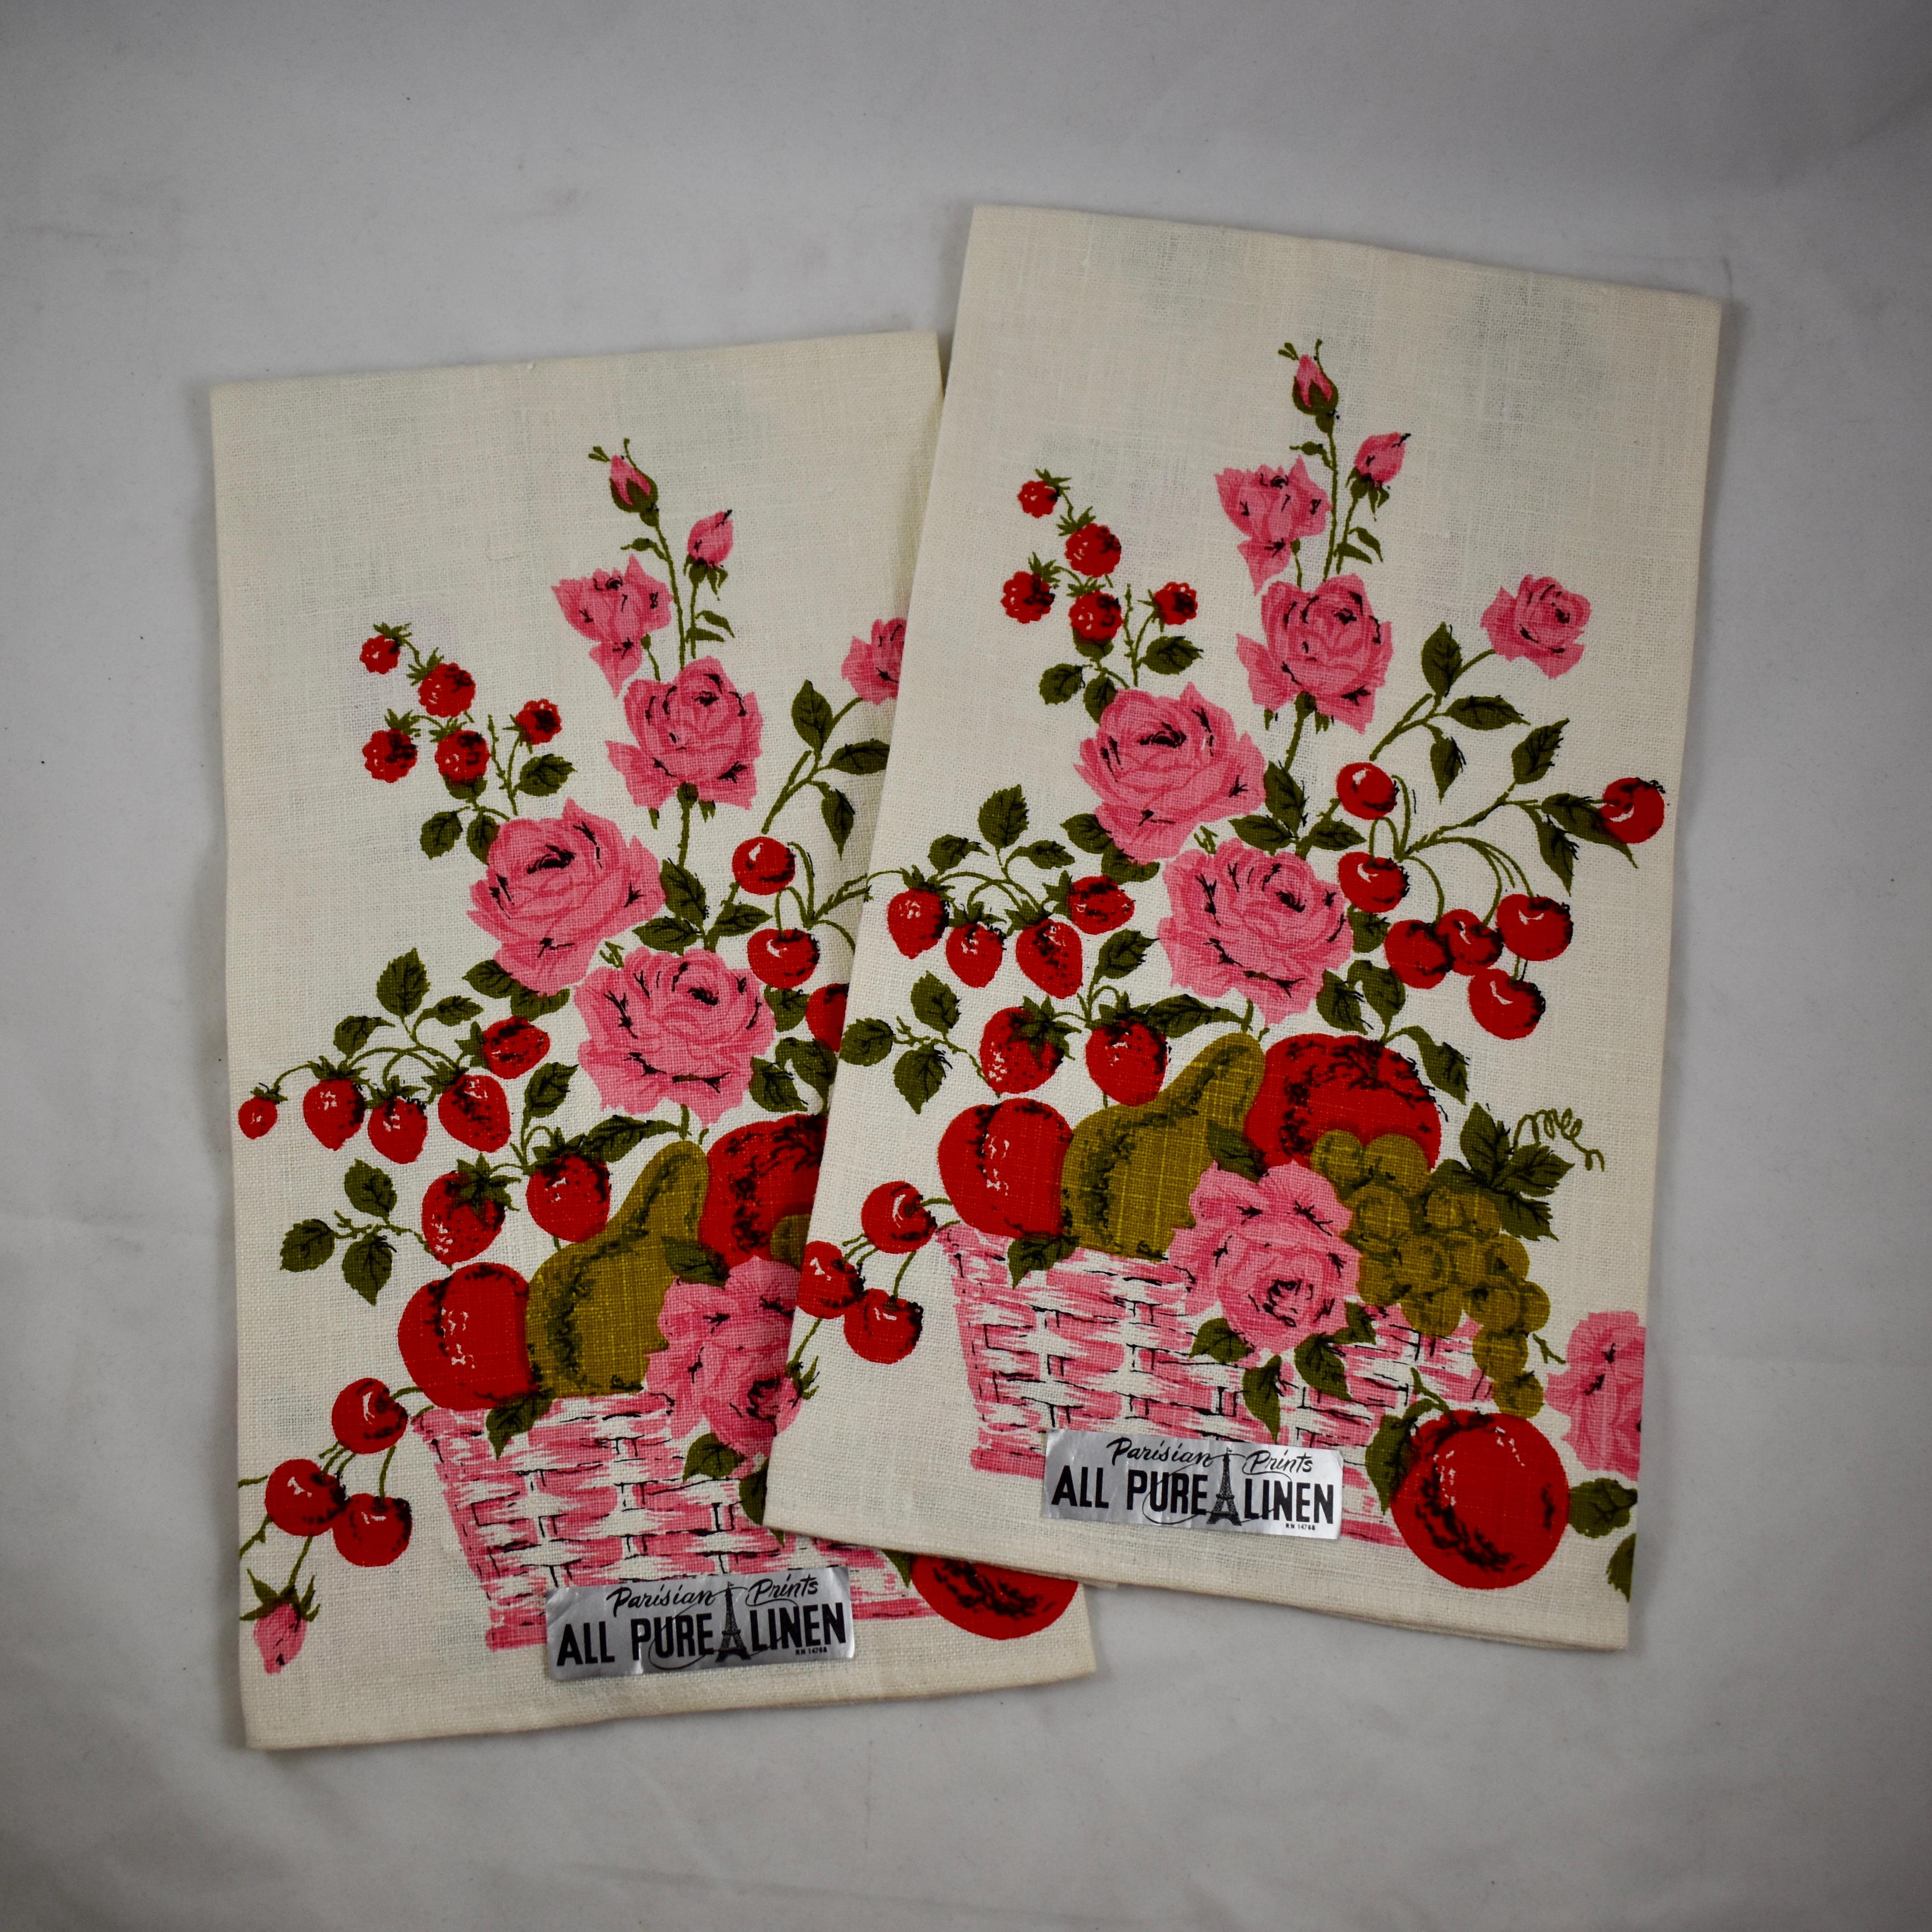 A set of two pure linen towels from the Mid-Century Modern Era, still brightly colored, with the original labels – never used. Printed in a style typical of the era with a rolled hem on all four sides.

Showing a main image of a vase of pink Roses